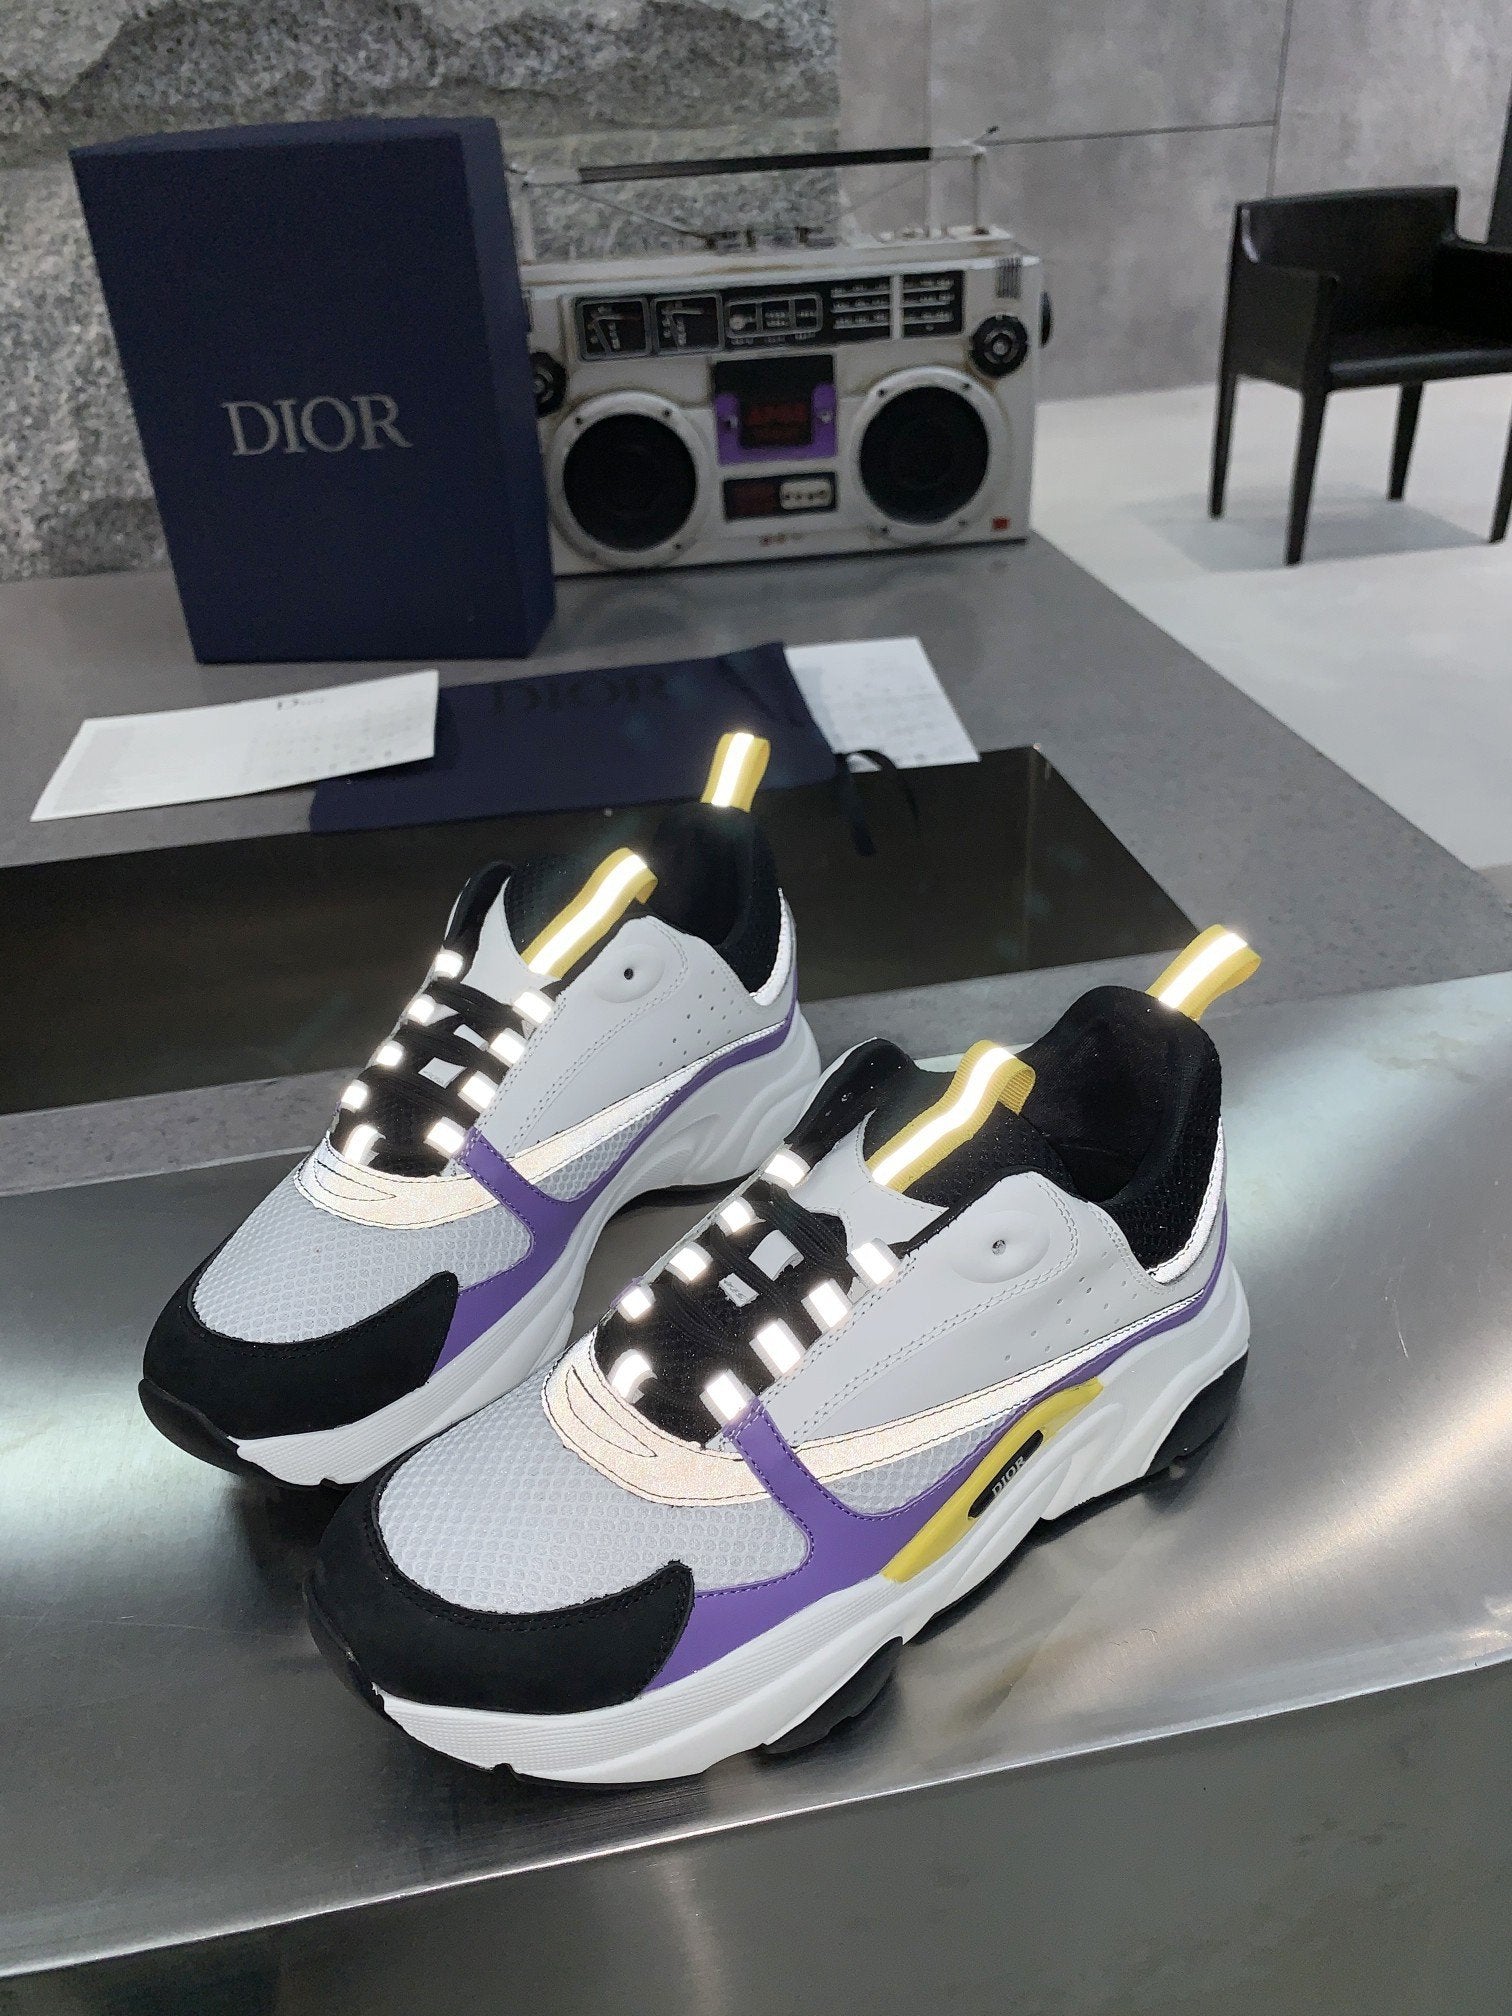 DIOR Woman's Men's 2020 New Fashion Casual Shoes Sneaker